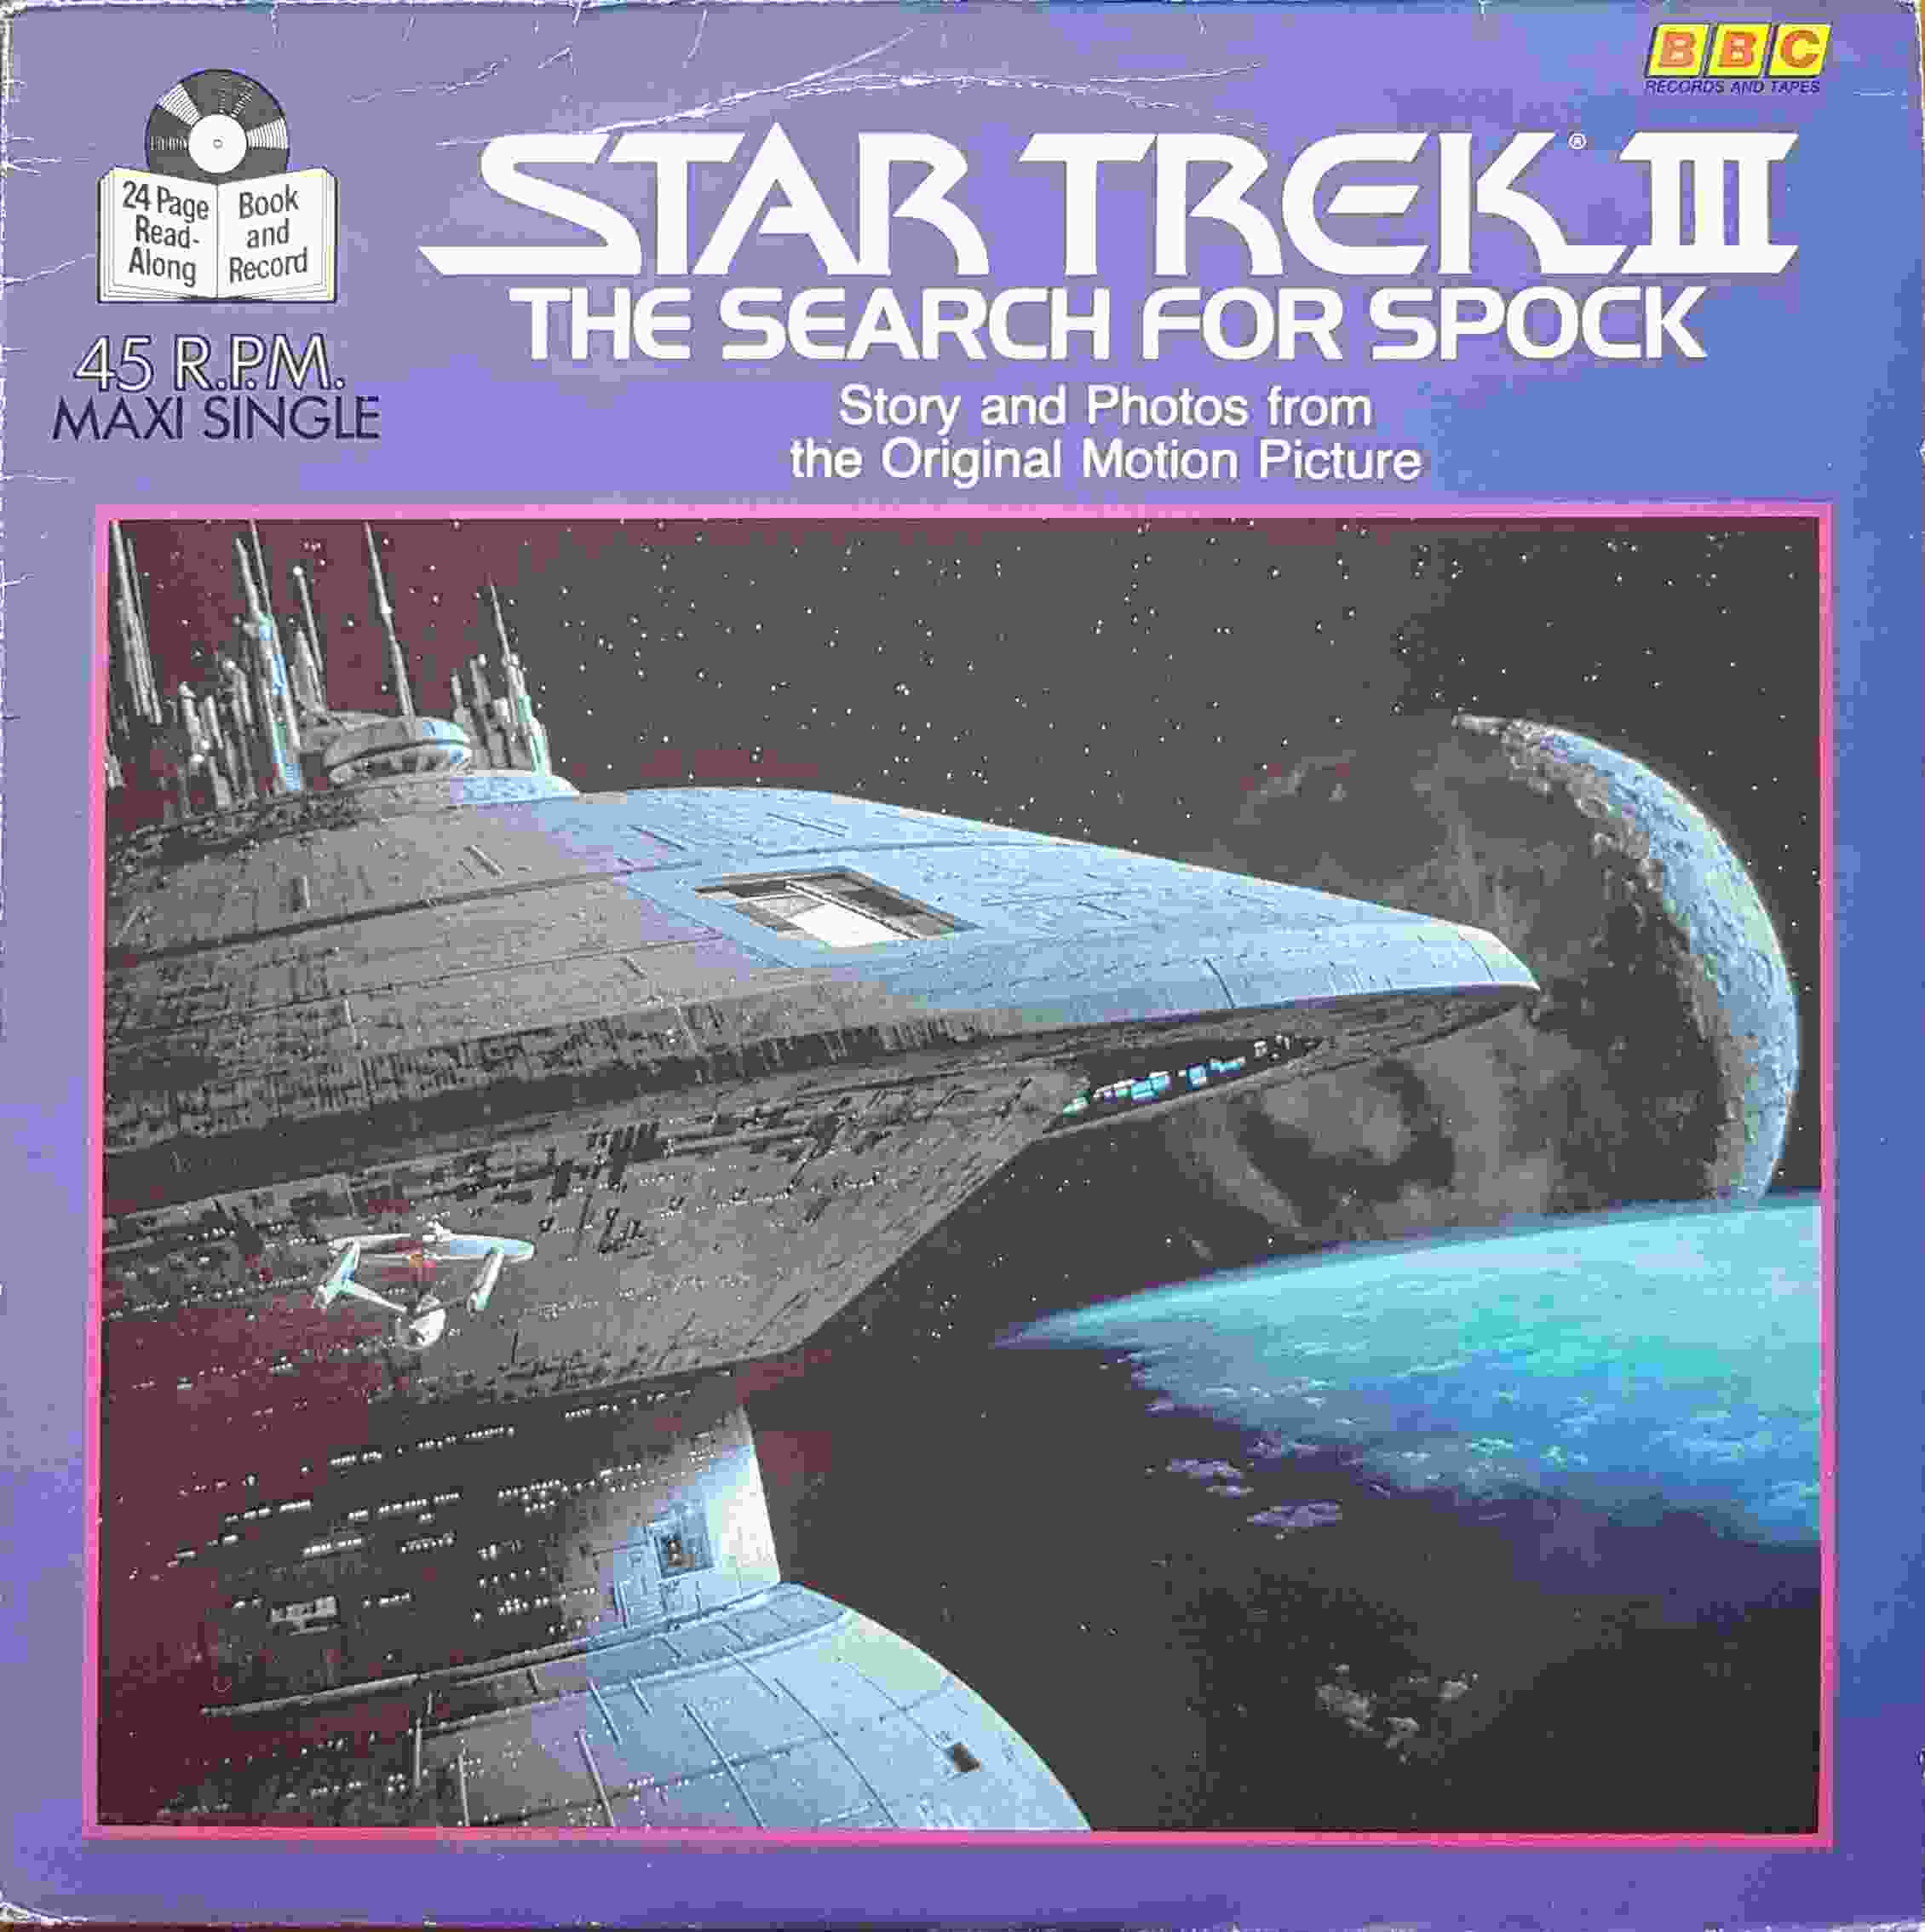 Picture of RESLD 002 Star trek III - The search for Spock by artist Unknown from the BBC records and Tapes library